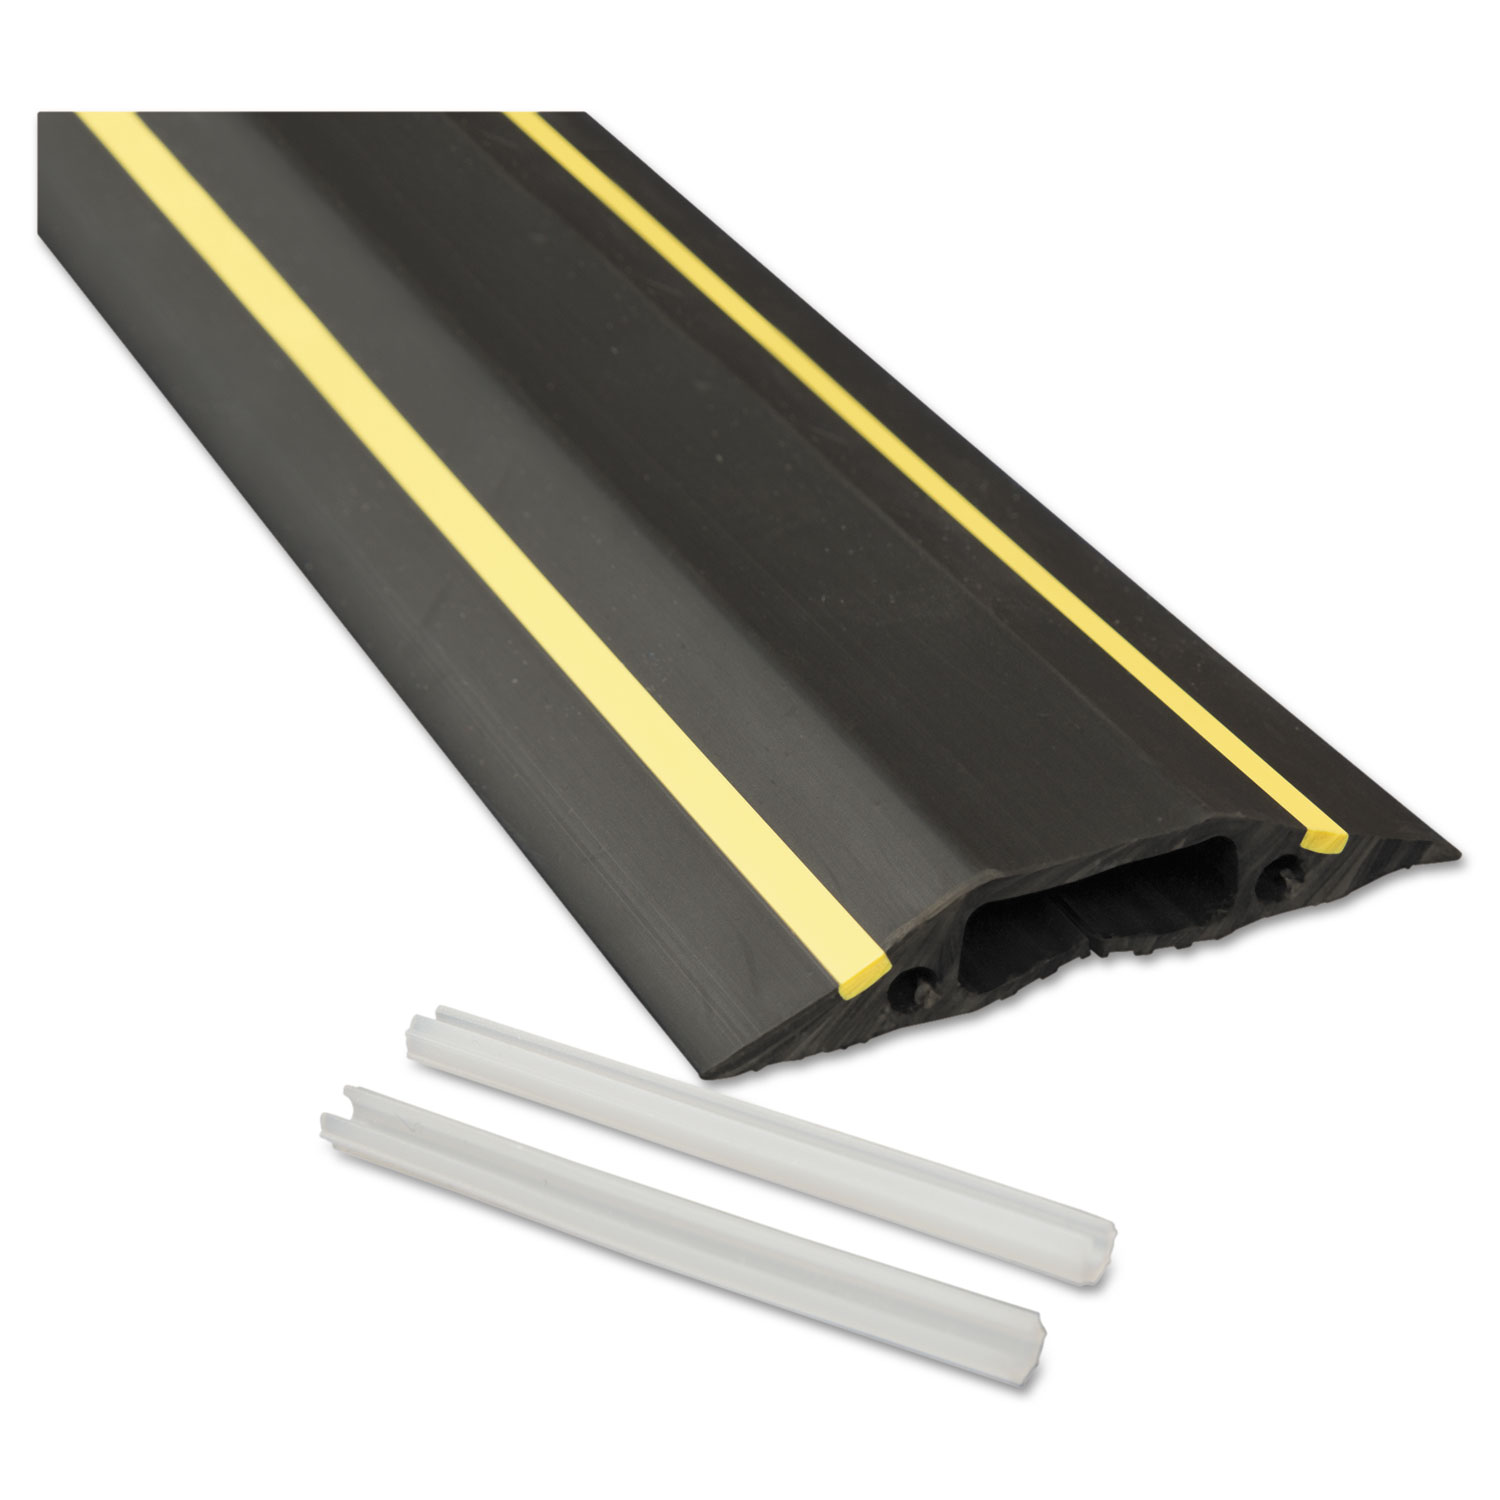 Medium-Duty Floor Cable Cover, 3.25 x 0.5 x 6 ft, Black with Yellow Stripe  - Zerbee